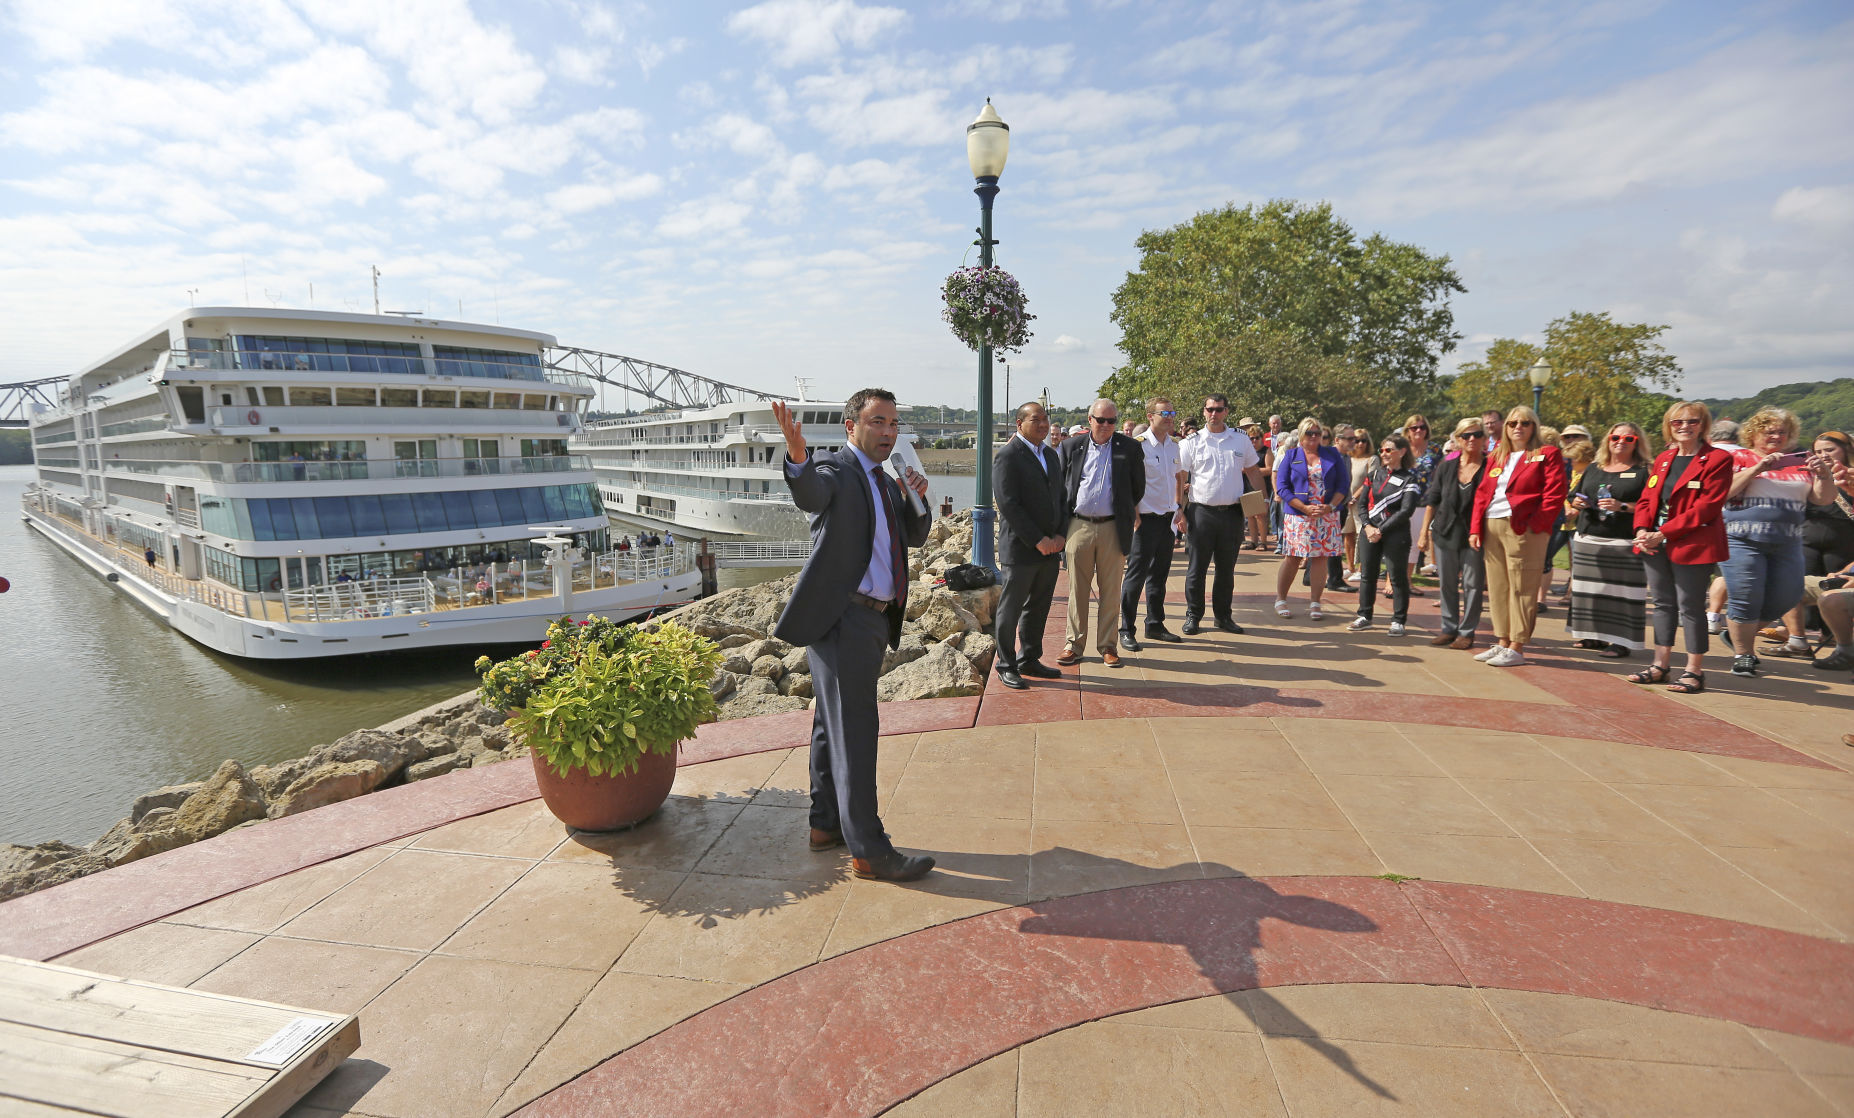 Dubuque Mayor Brad Cavanagh speaks during a ribbon cutting ceremony held for the Viking Mississippi cruise ship that docked at the Port of Dubuque for the first time on Tuesday, Sept. 6, 2022.    PHOTO CREDIT: Dave Kettering